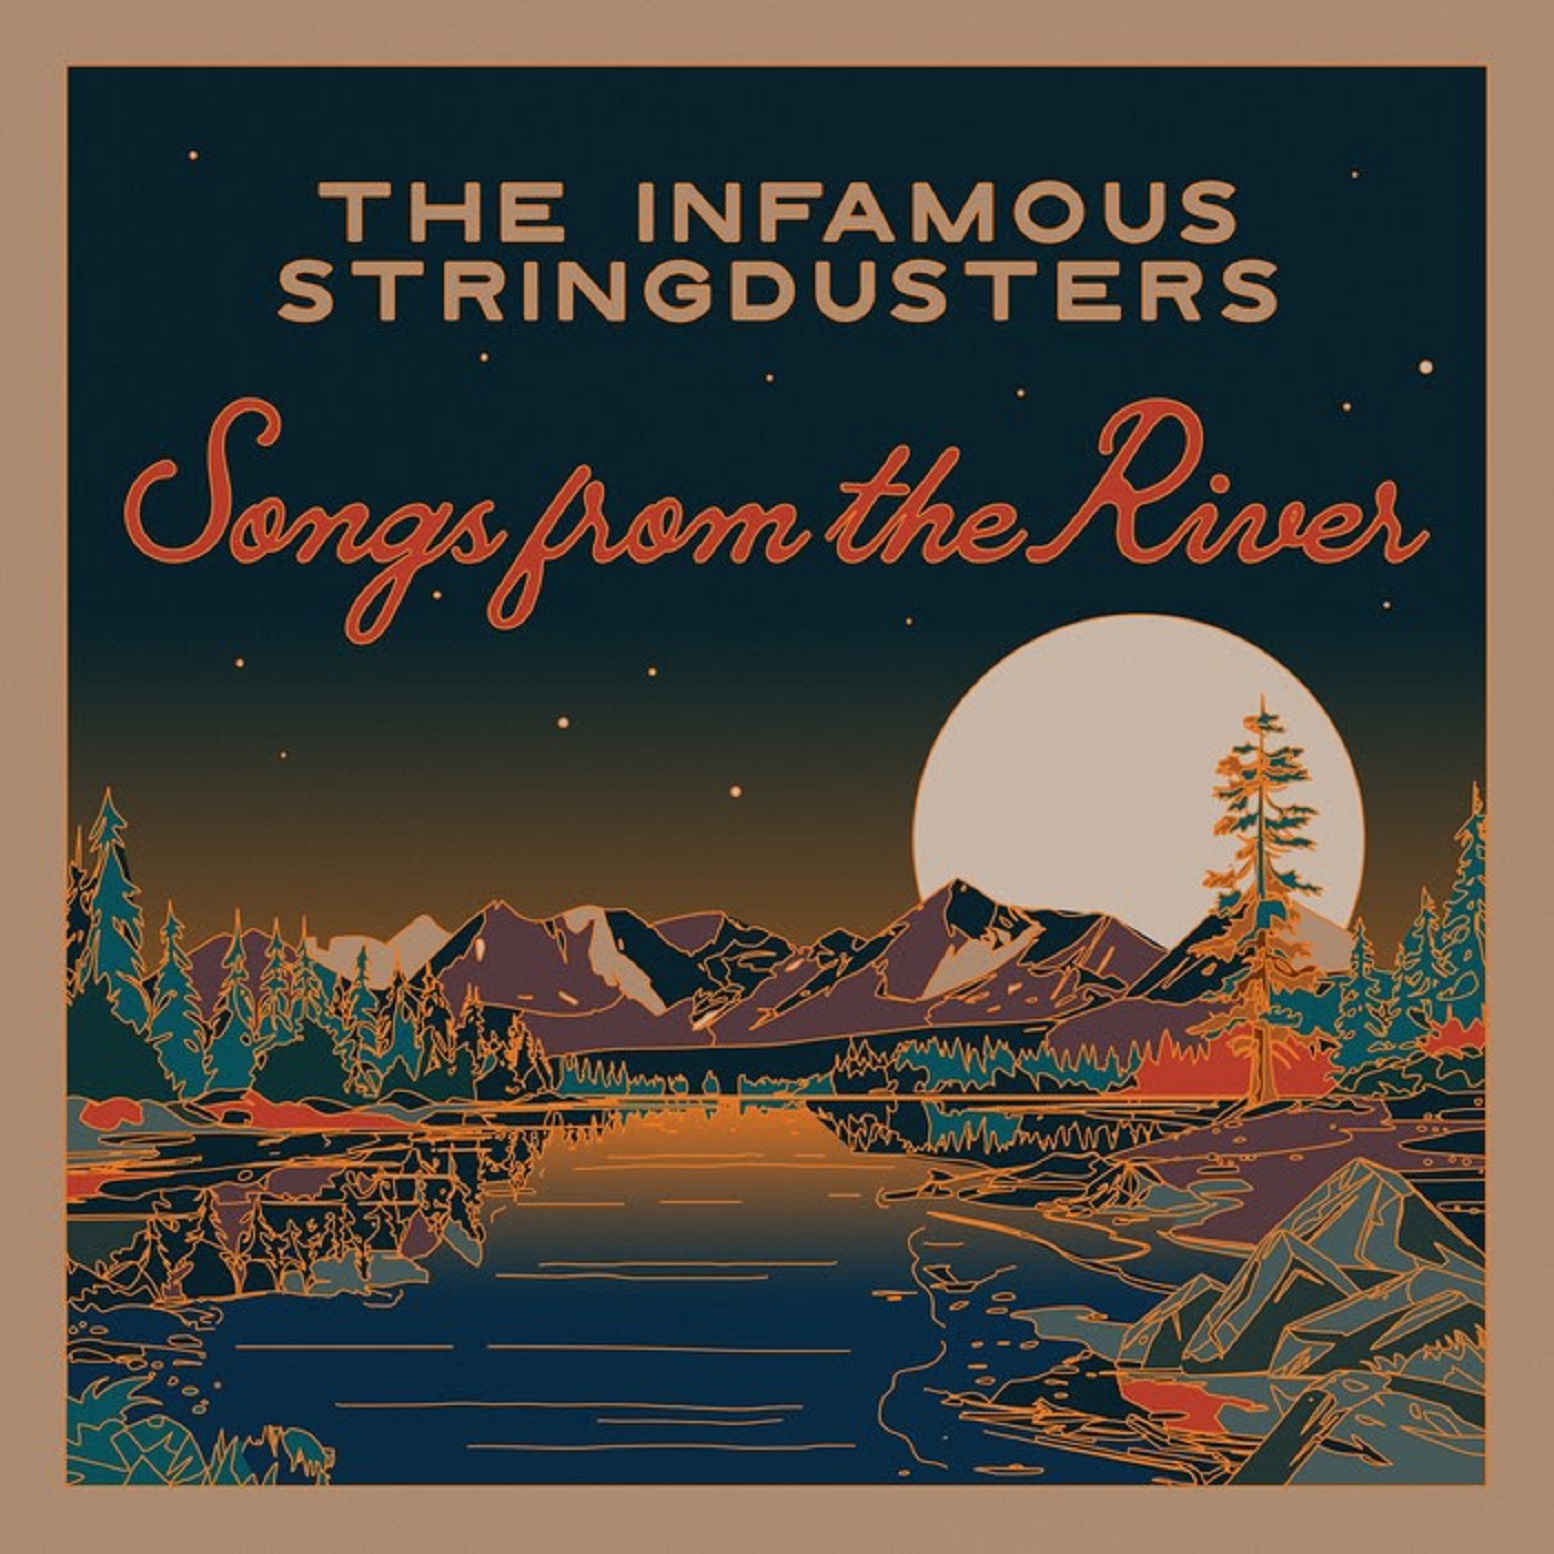 The Infamous Stringdusters Release 24-Song ‘Songs from the River’ Compilation Ahead of Nights on the River Tour